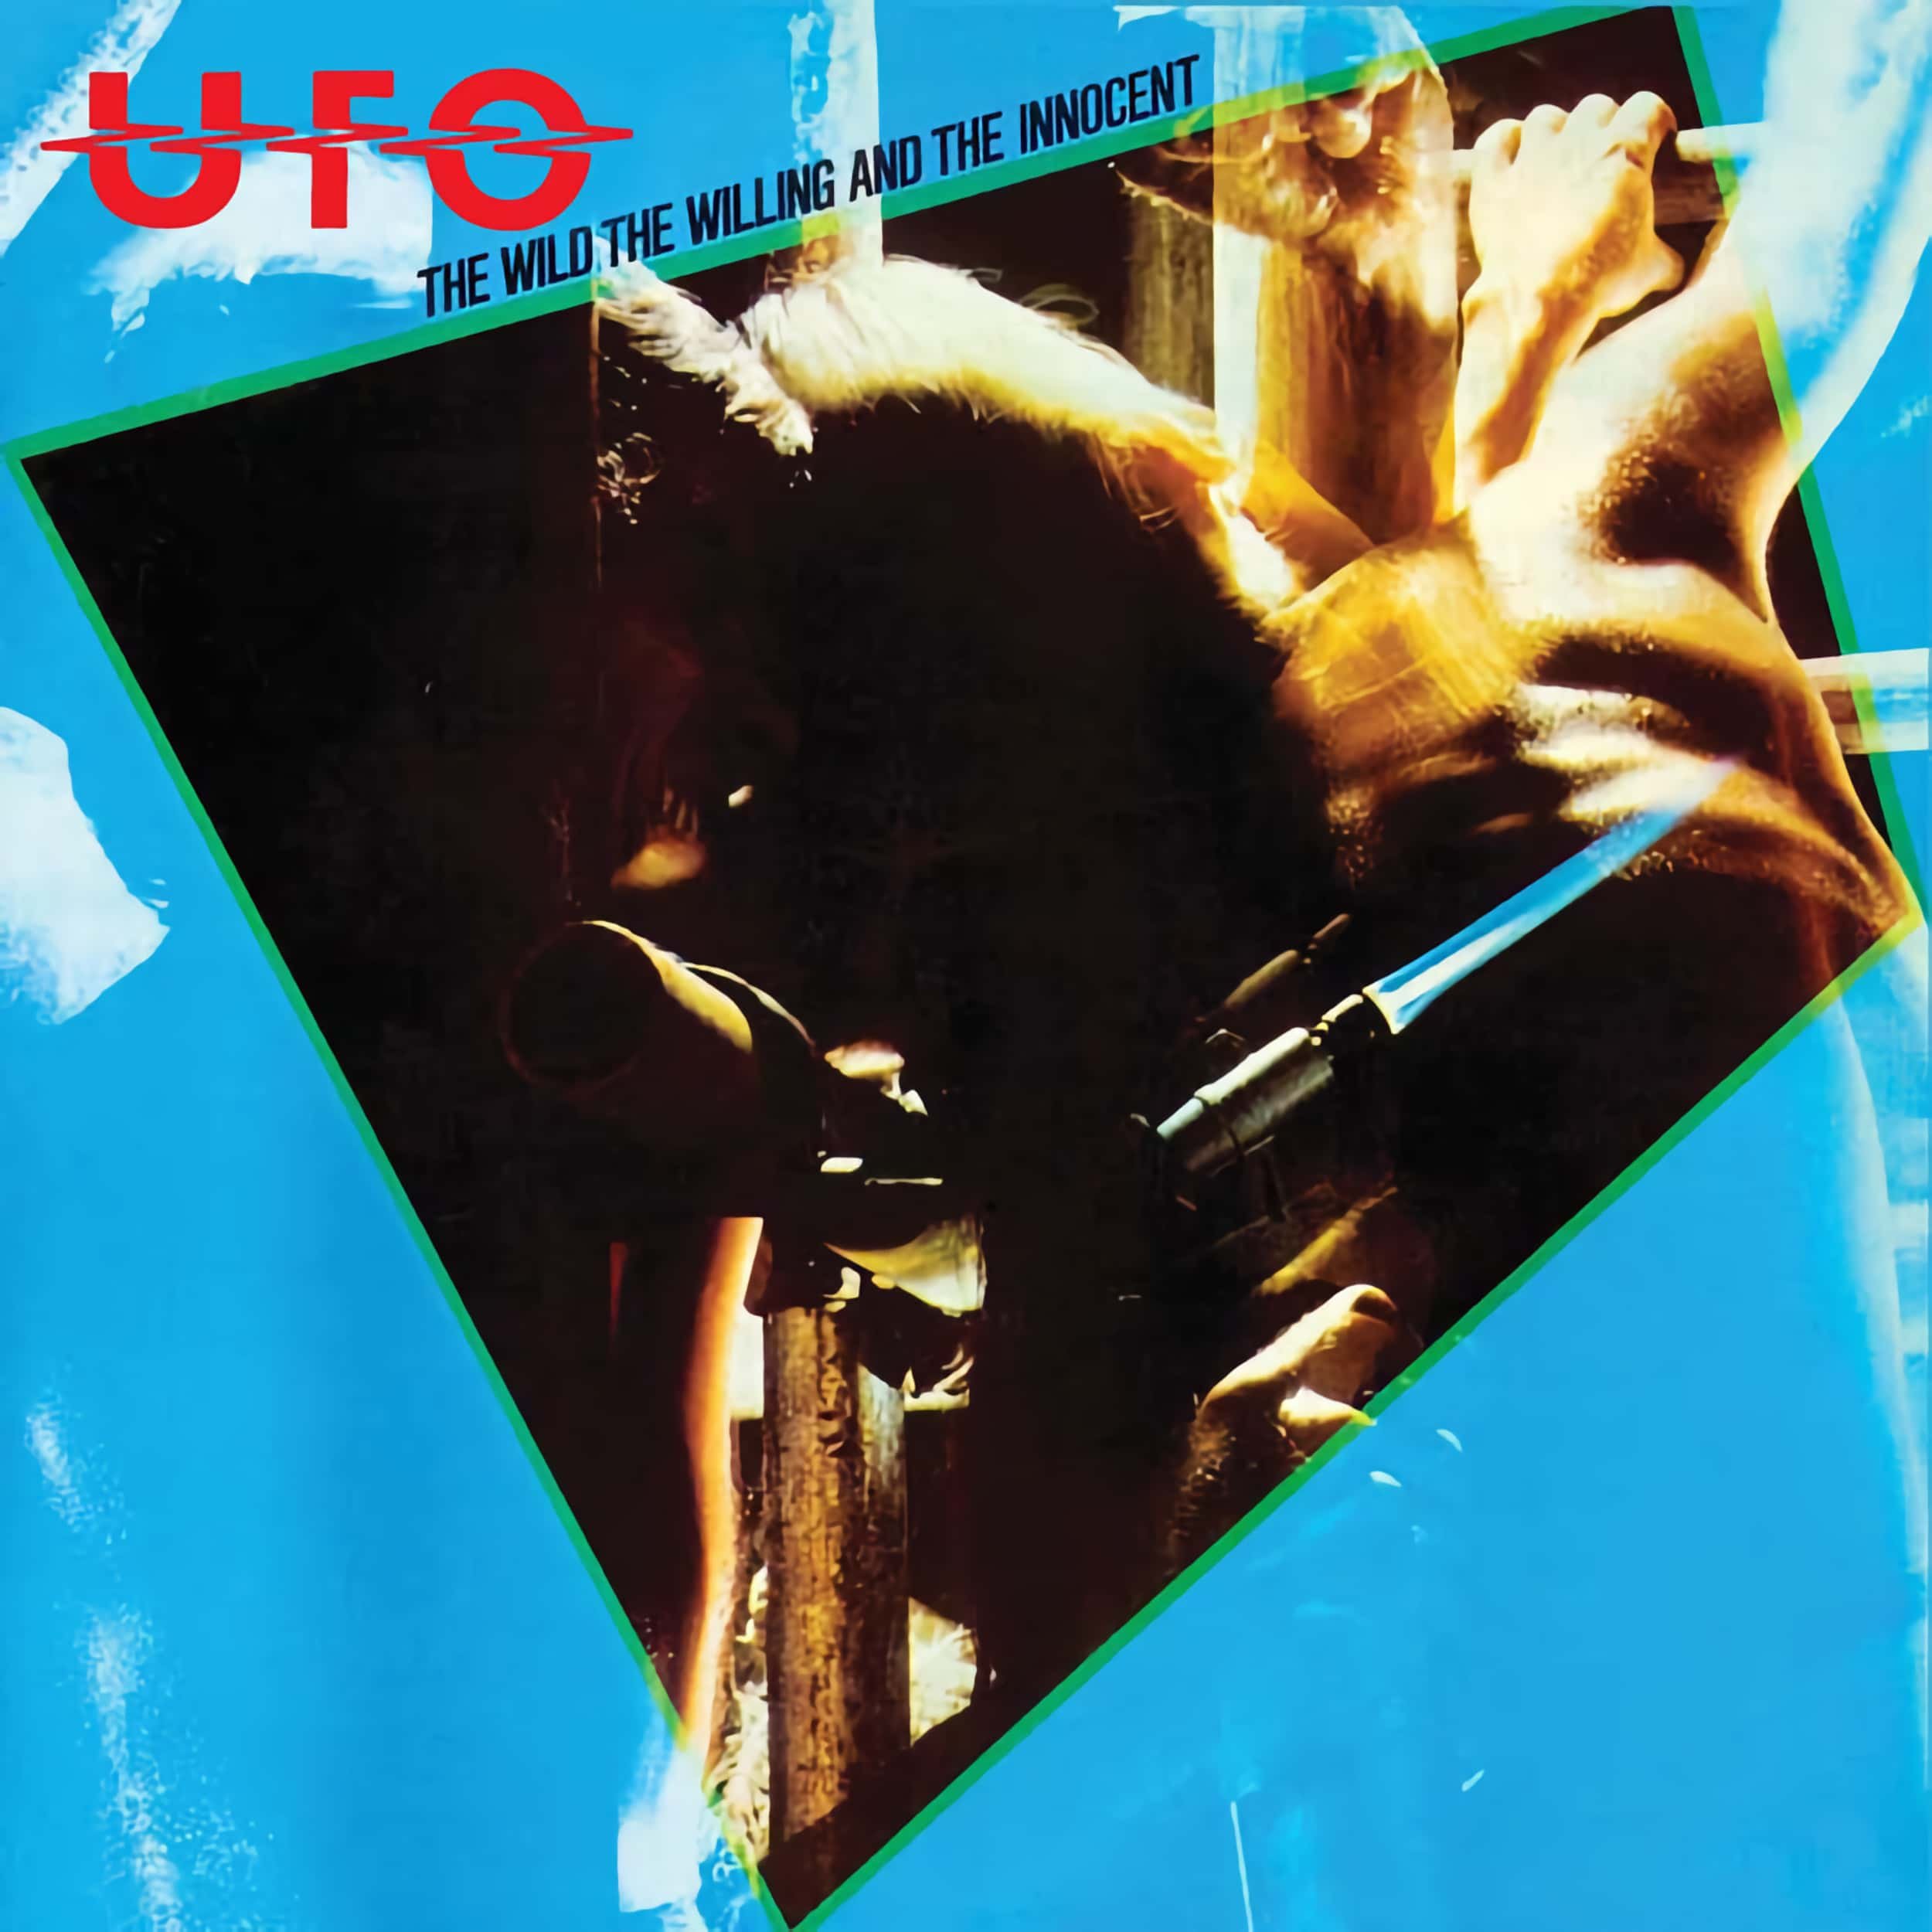 UFO –&nbsp;The Wild, the Willing and the Innocent